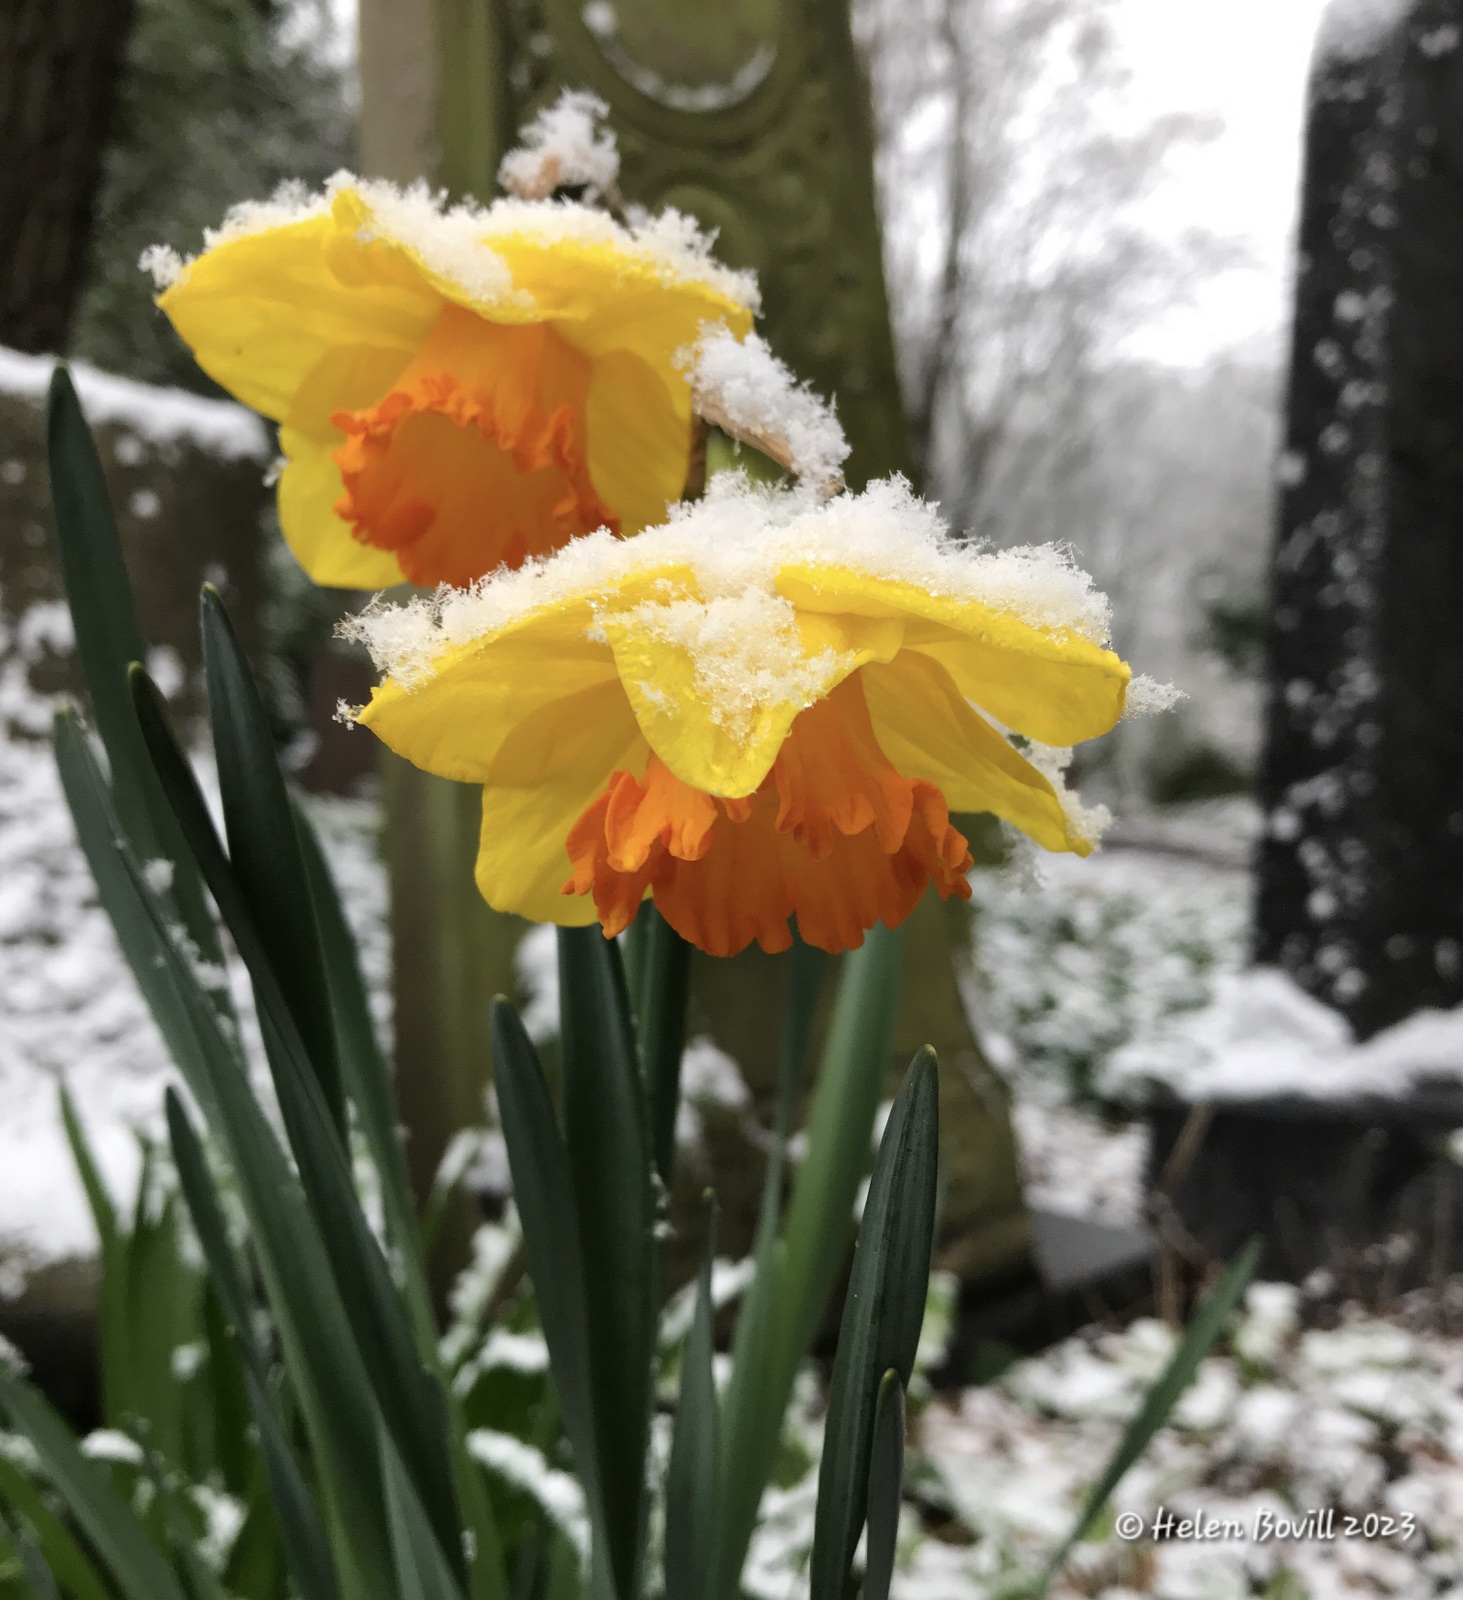 Daffodils in the snow, with a headstone in the background